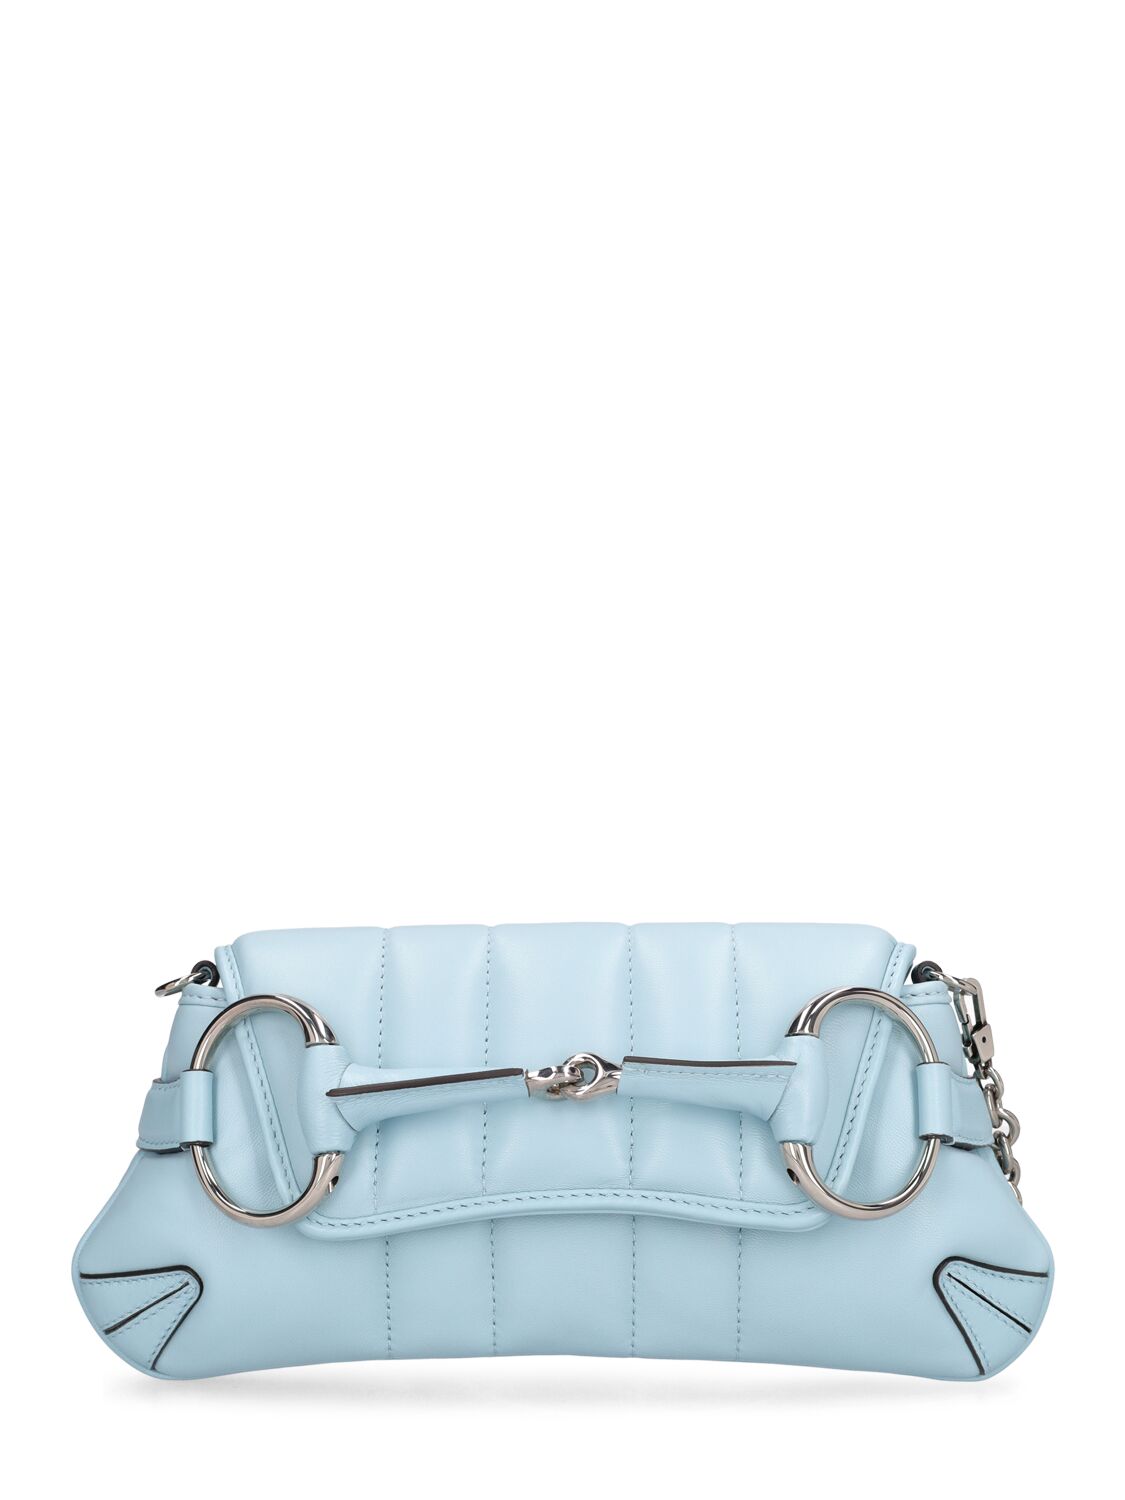 Gucci Small Horsebit Chain Leather Bag In Crystal Snow